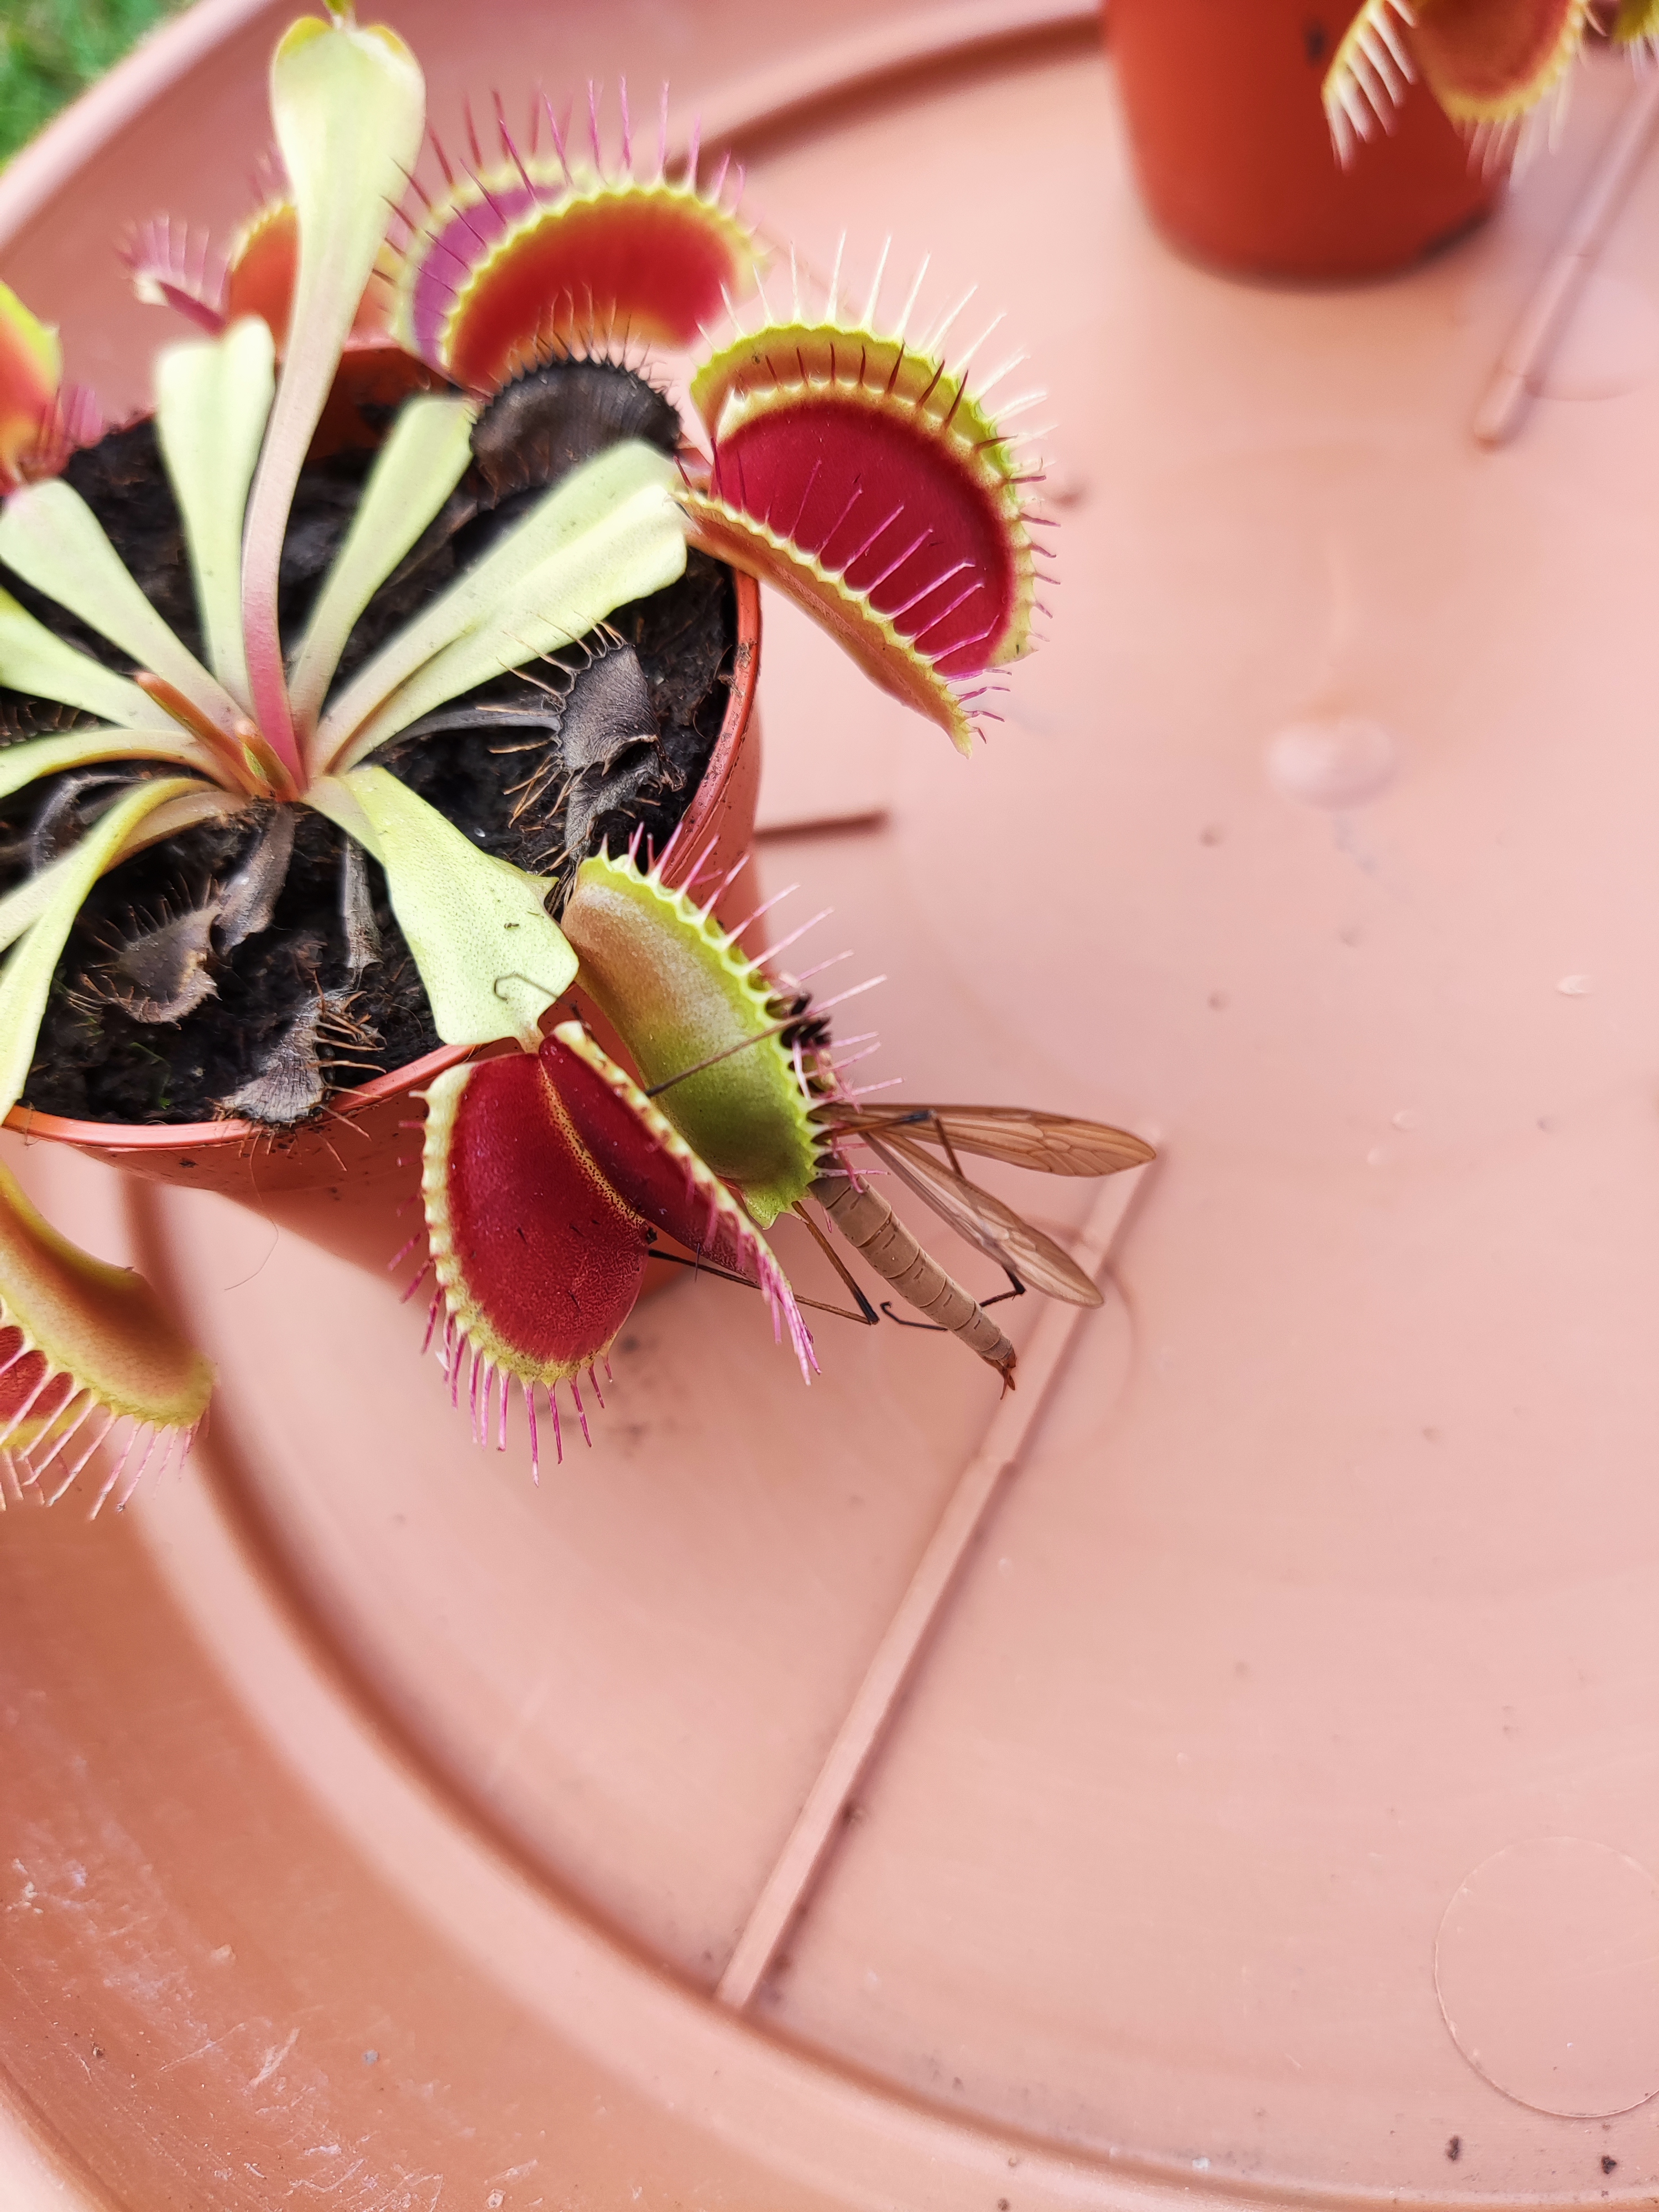 Venus flytrap that has caught a dragonfly that is way too big for its trap